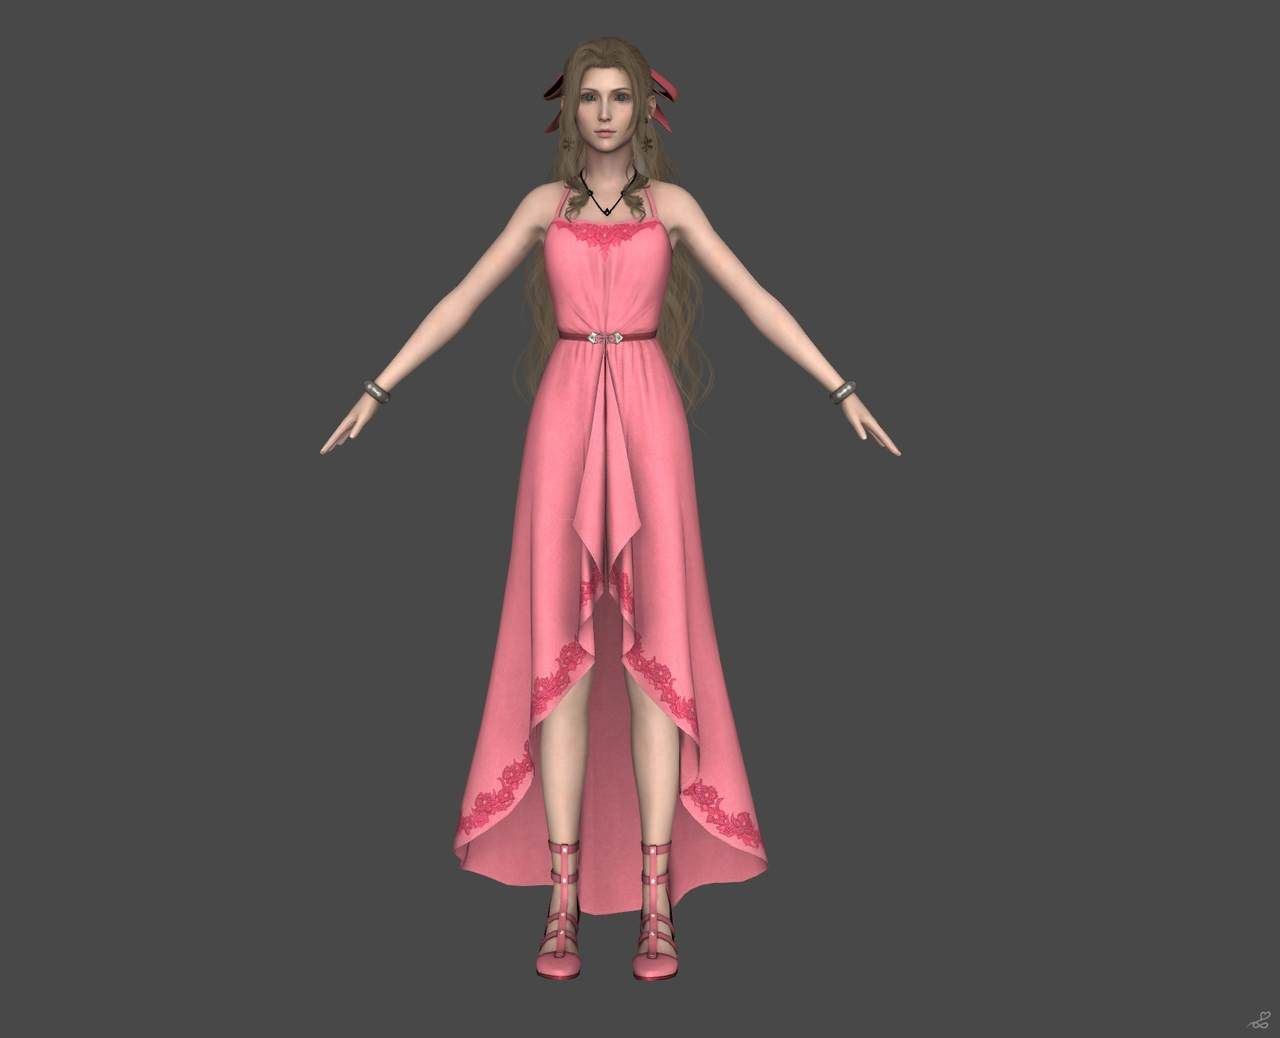 [J.A.] FF7 Remake | Aerith Reference 1